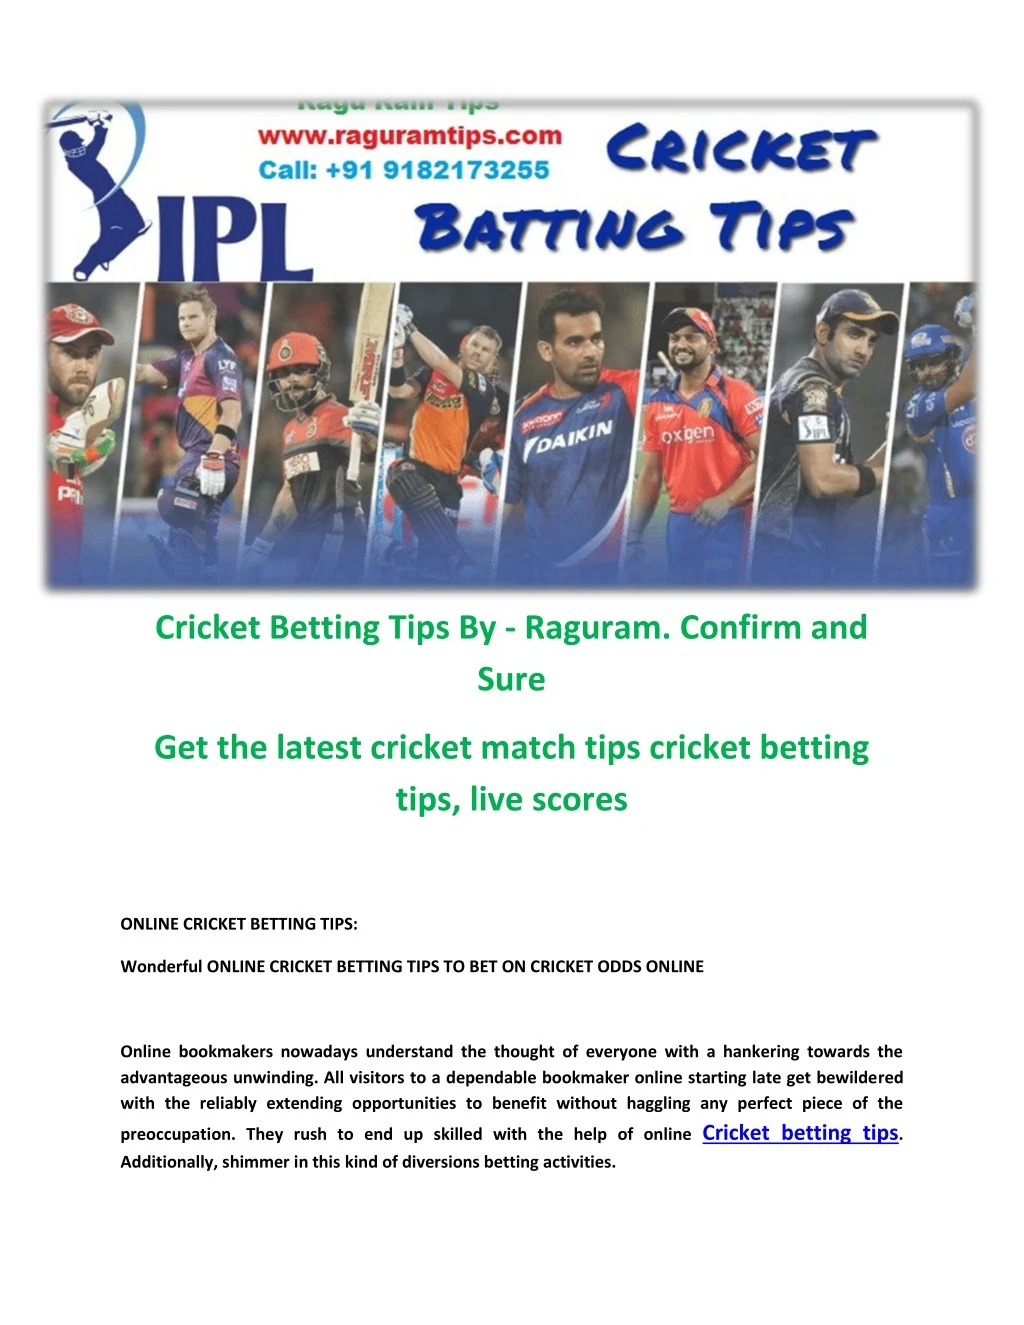 cricket betting tips by raguram confirm and sure